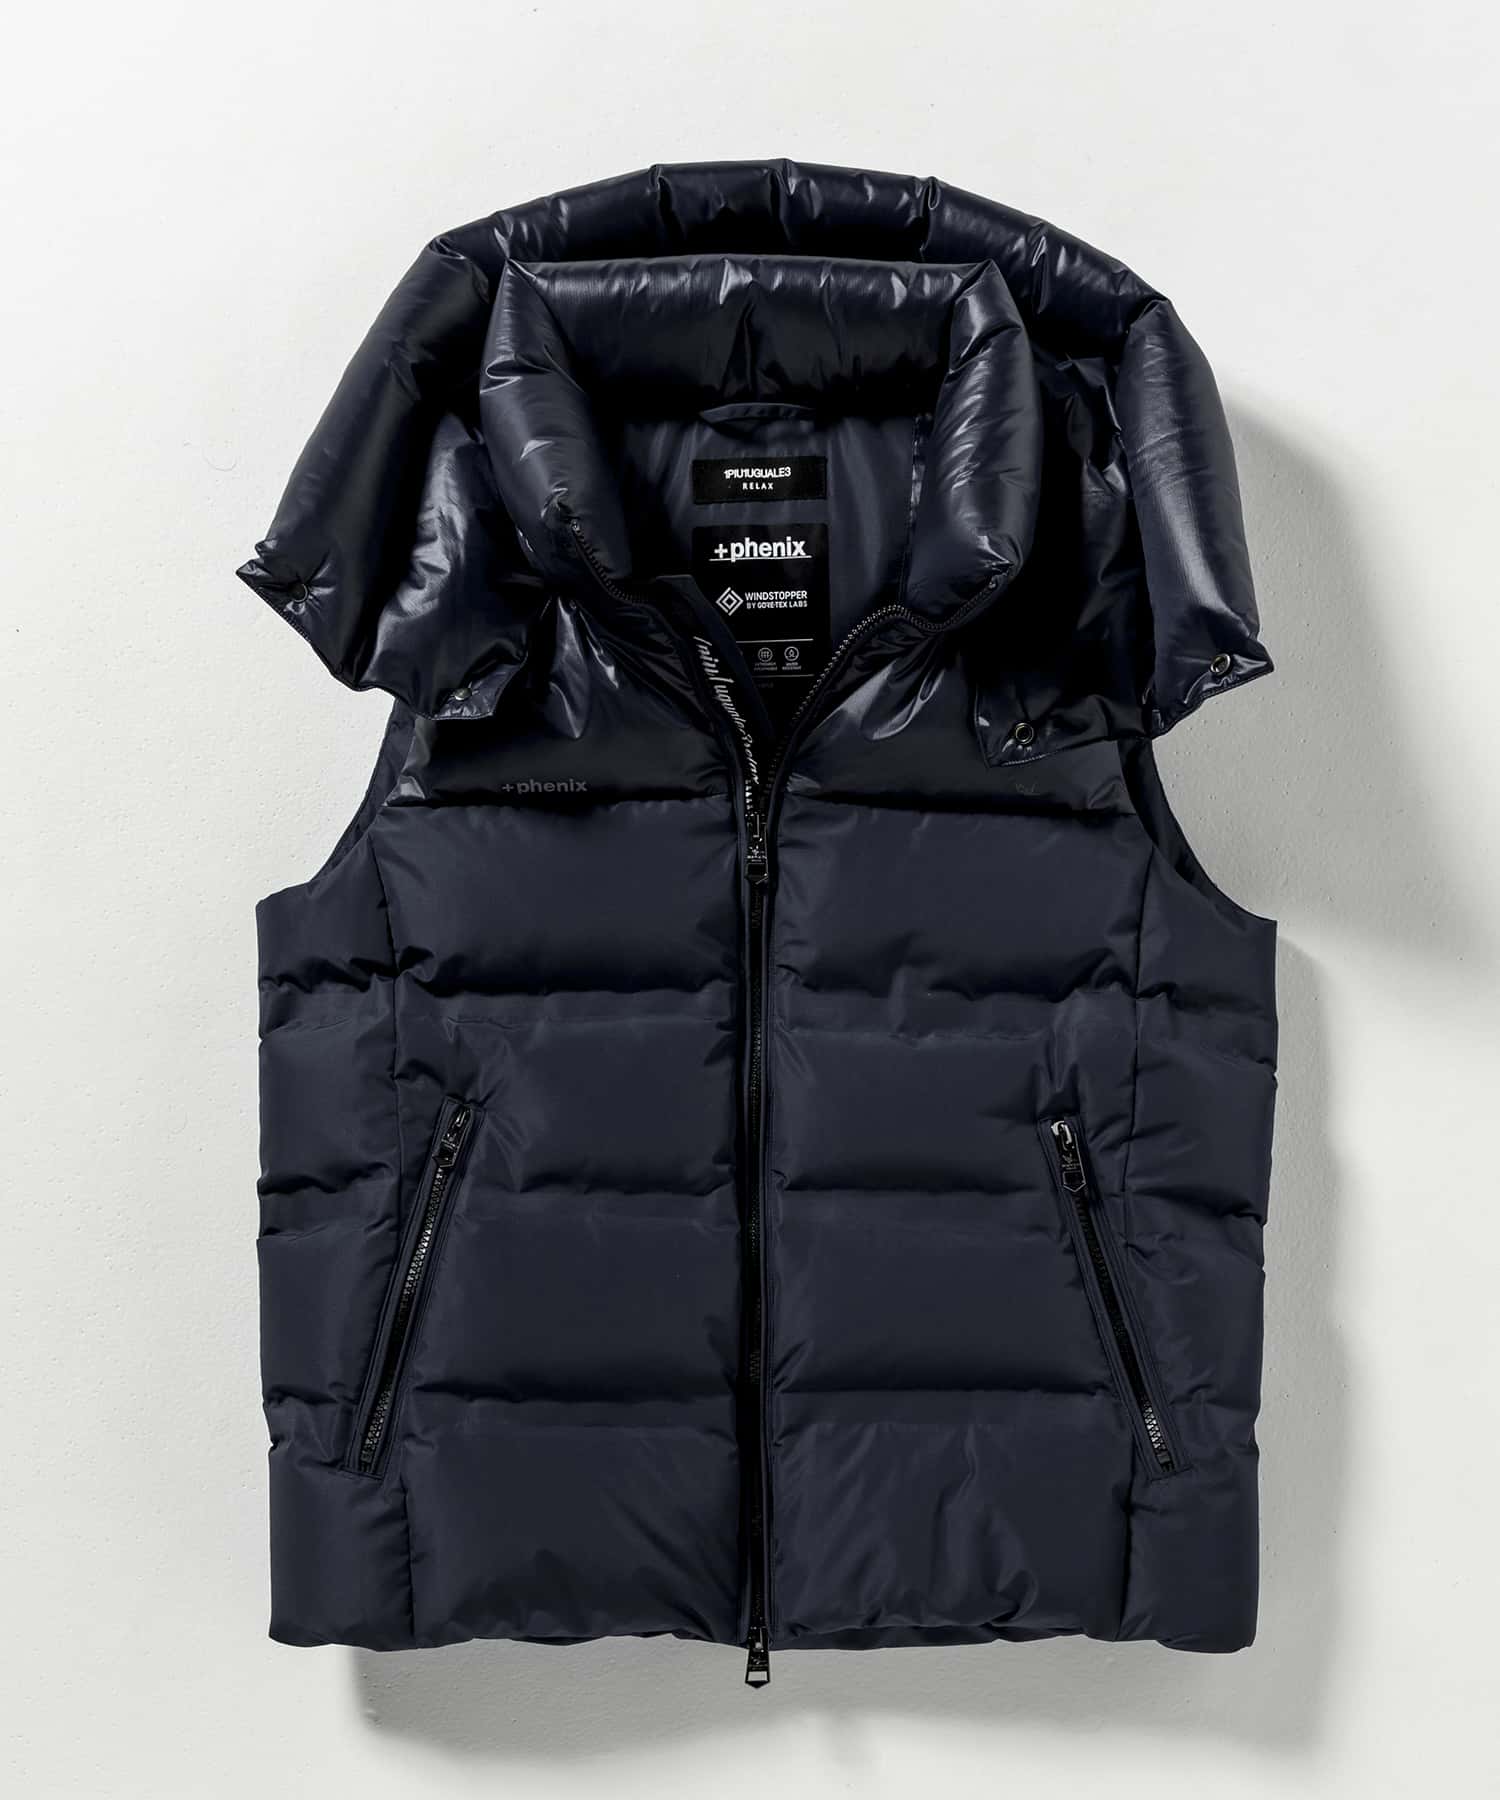 MENS】コンビダウンベスト WINDSTOPPER(R) プロダクト by GORE-TEX 